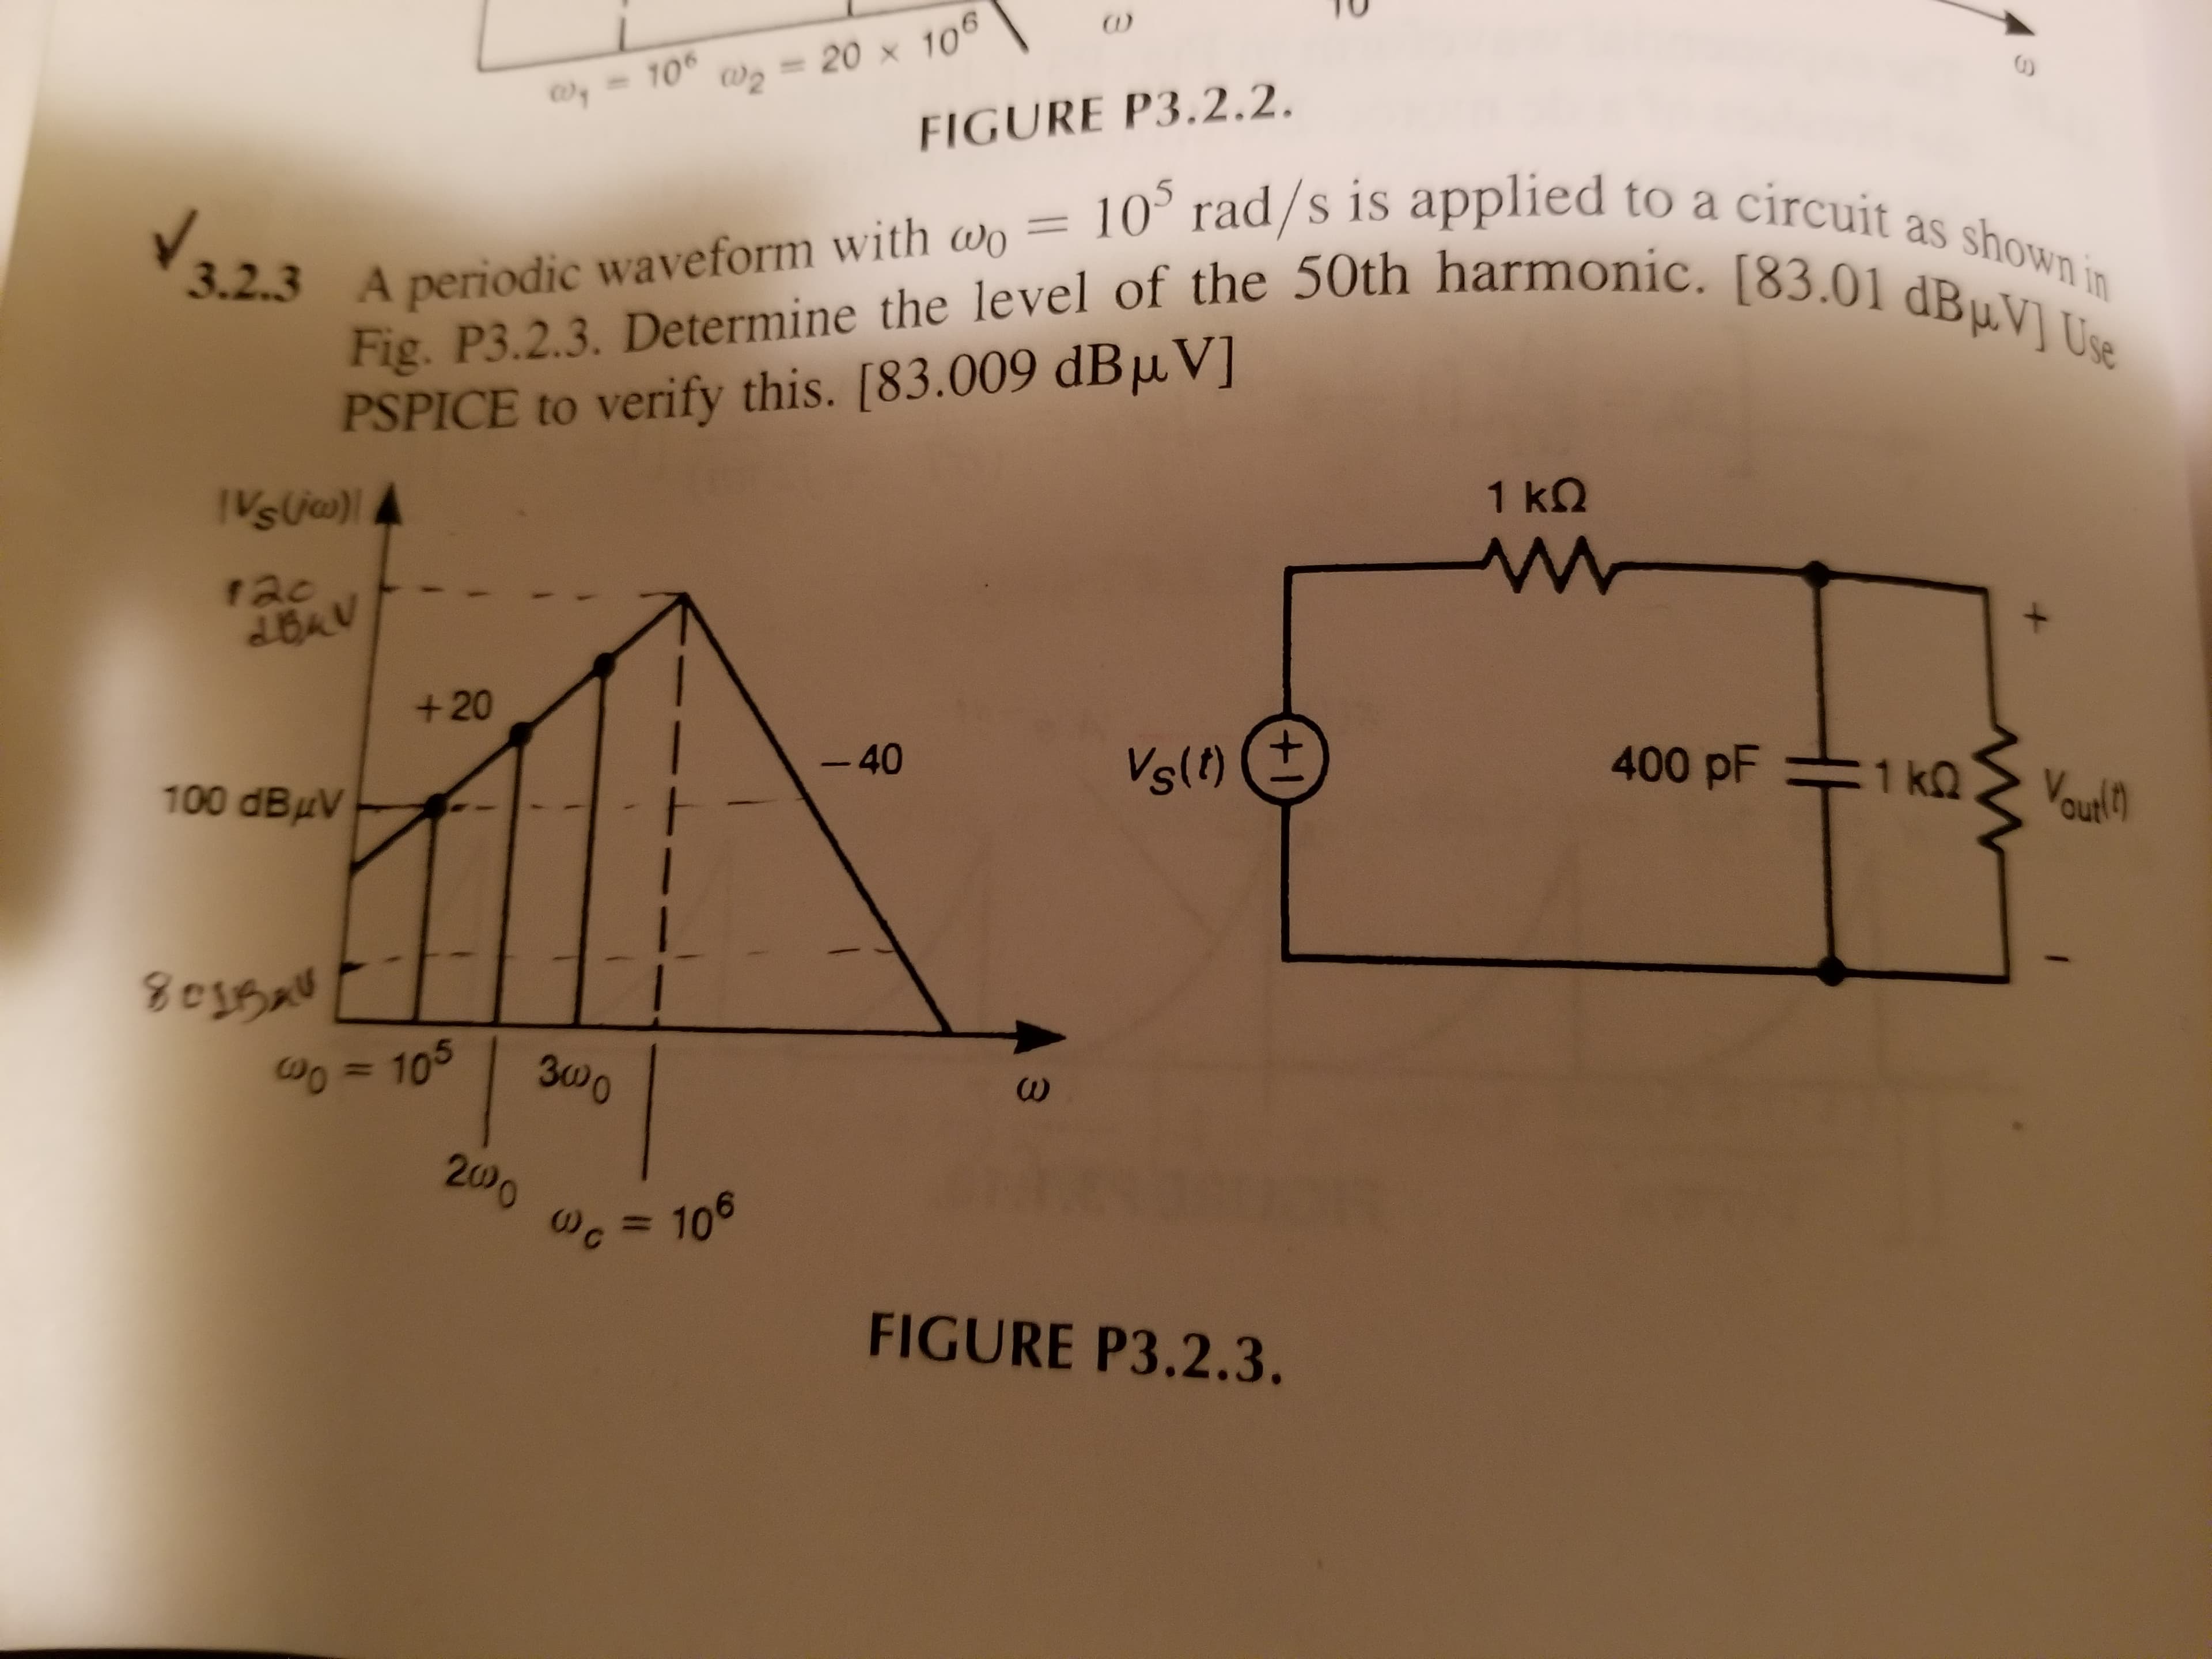 - 10
Wz =
20 x 106
%3D
FIGURE P3.2.2.
10° rad/s is applied to a circuit as shown in
Fig. P3.2.3. Determine the level of the 50th harmonic. [83.01 dBµV] Use
3.2.3 A periodic waveform with wo ?
PSPICE to verify this. [83.009 dBµV]
VsU)4
1 ΚΩ
r20
2BAV
+20
-40
Vsl)
400 pF 1 kQ
100 dBuV
Vout!h
Do = 105
З000
200 0c
106
%3D
FIGURE P3.2.3.
+1
